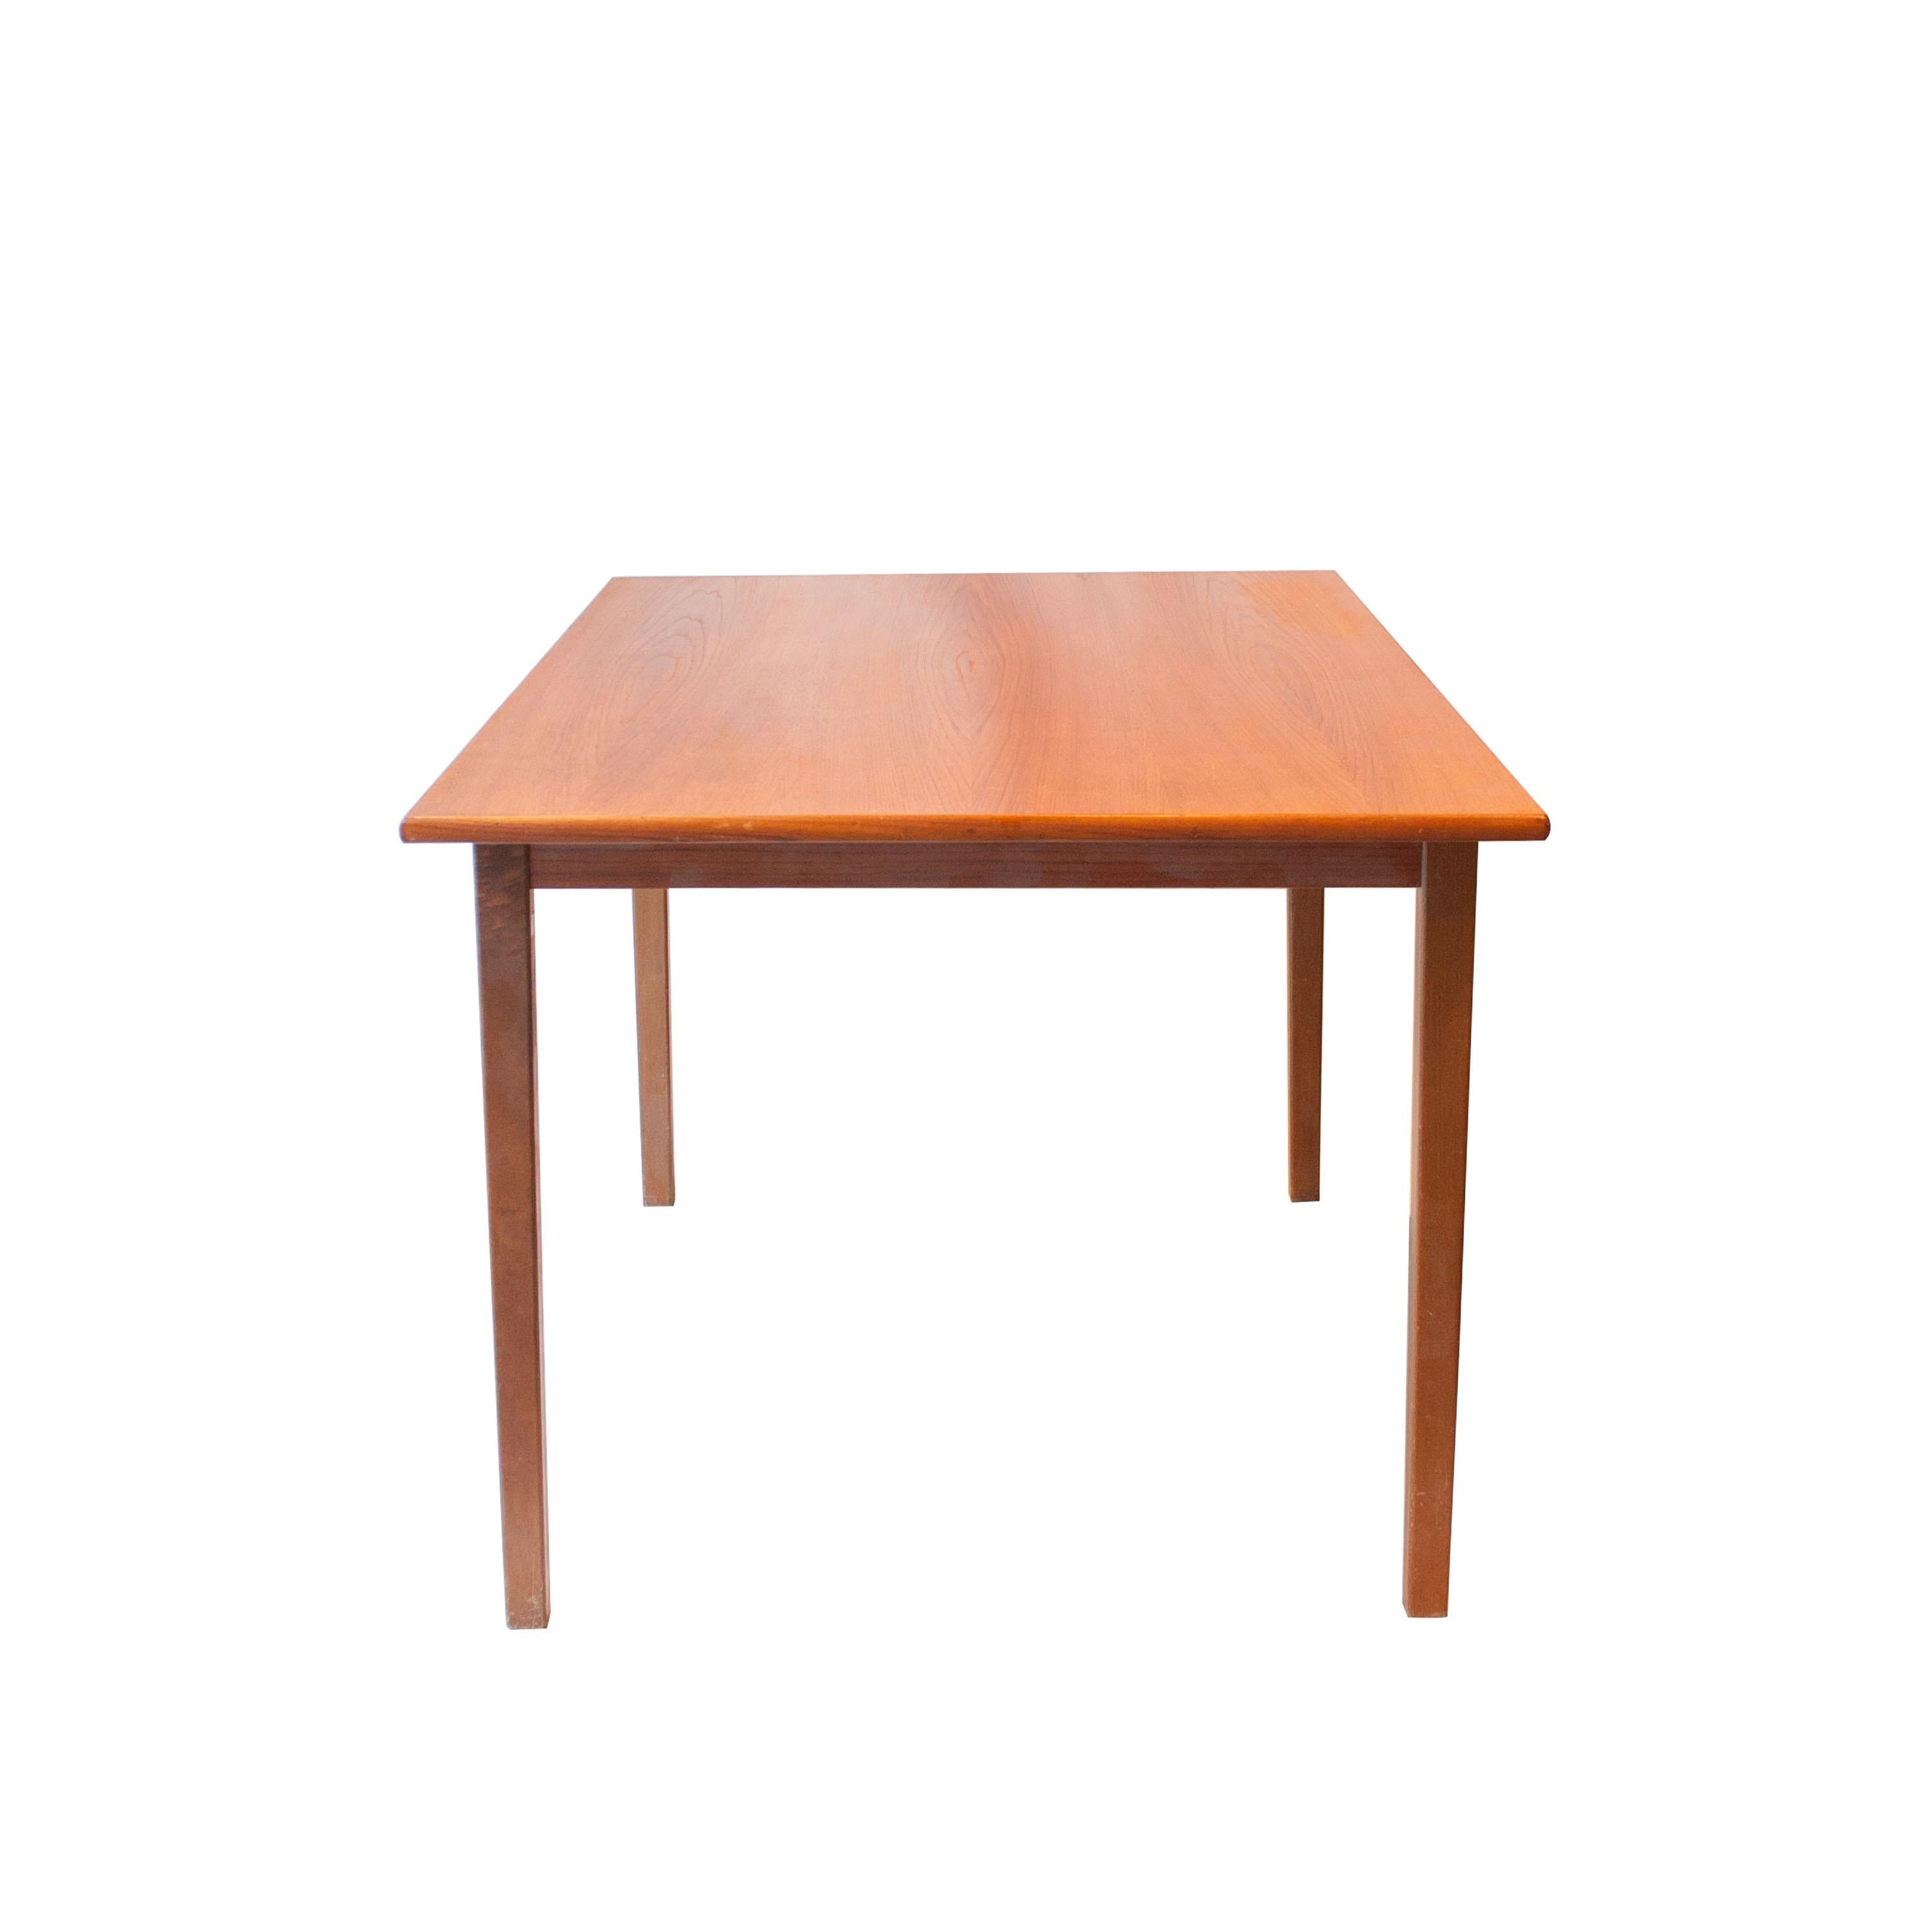 Mid-Century Modern Rectangular Teak Wood Swedish Dining Table, 1960 In Good Condition For Sale In Madrid, ES